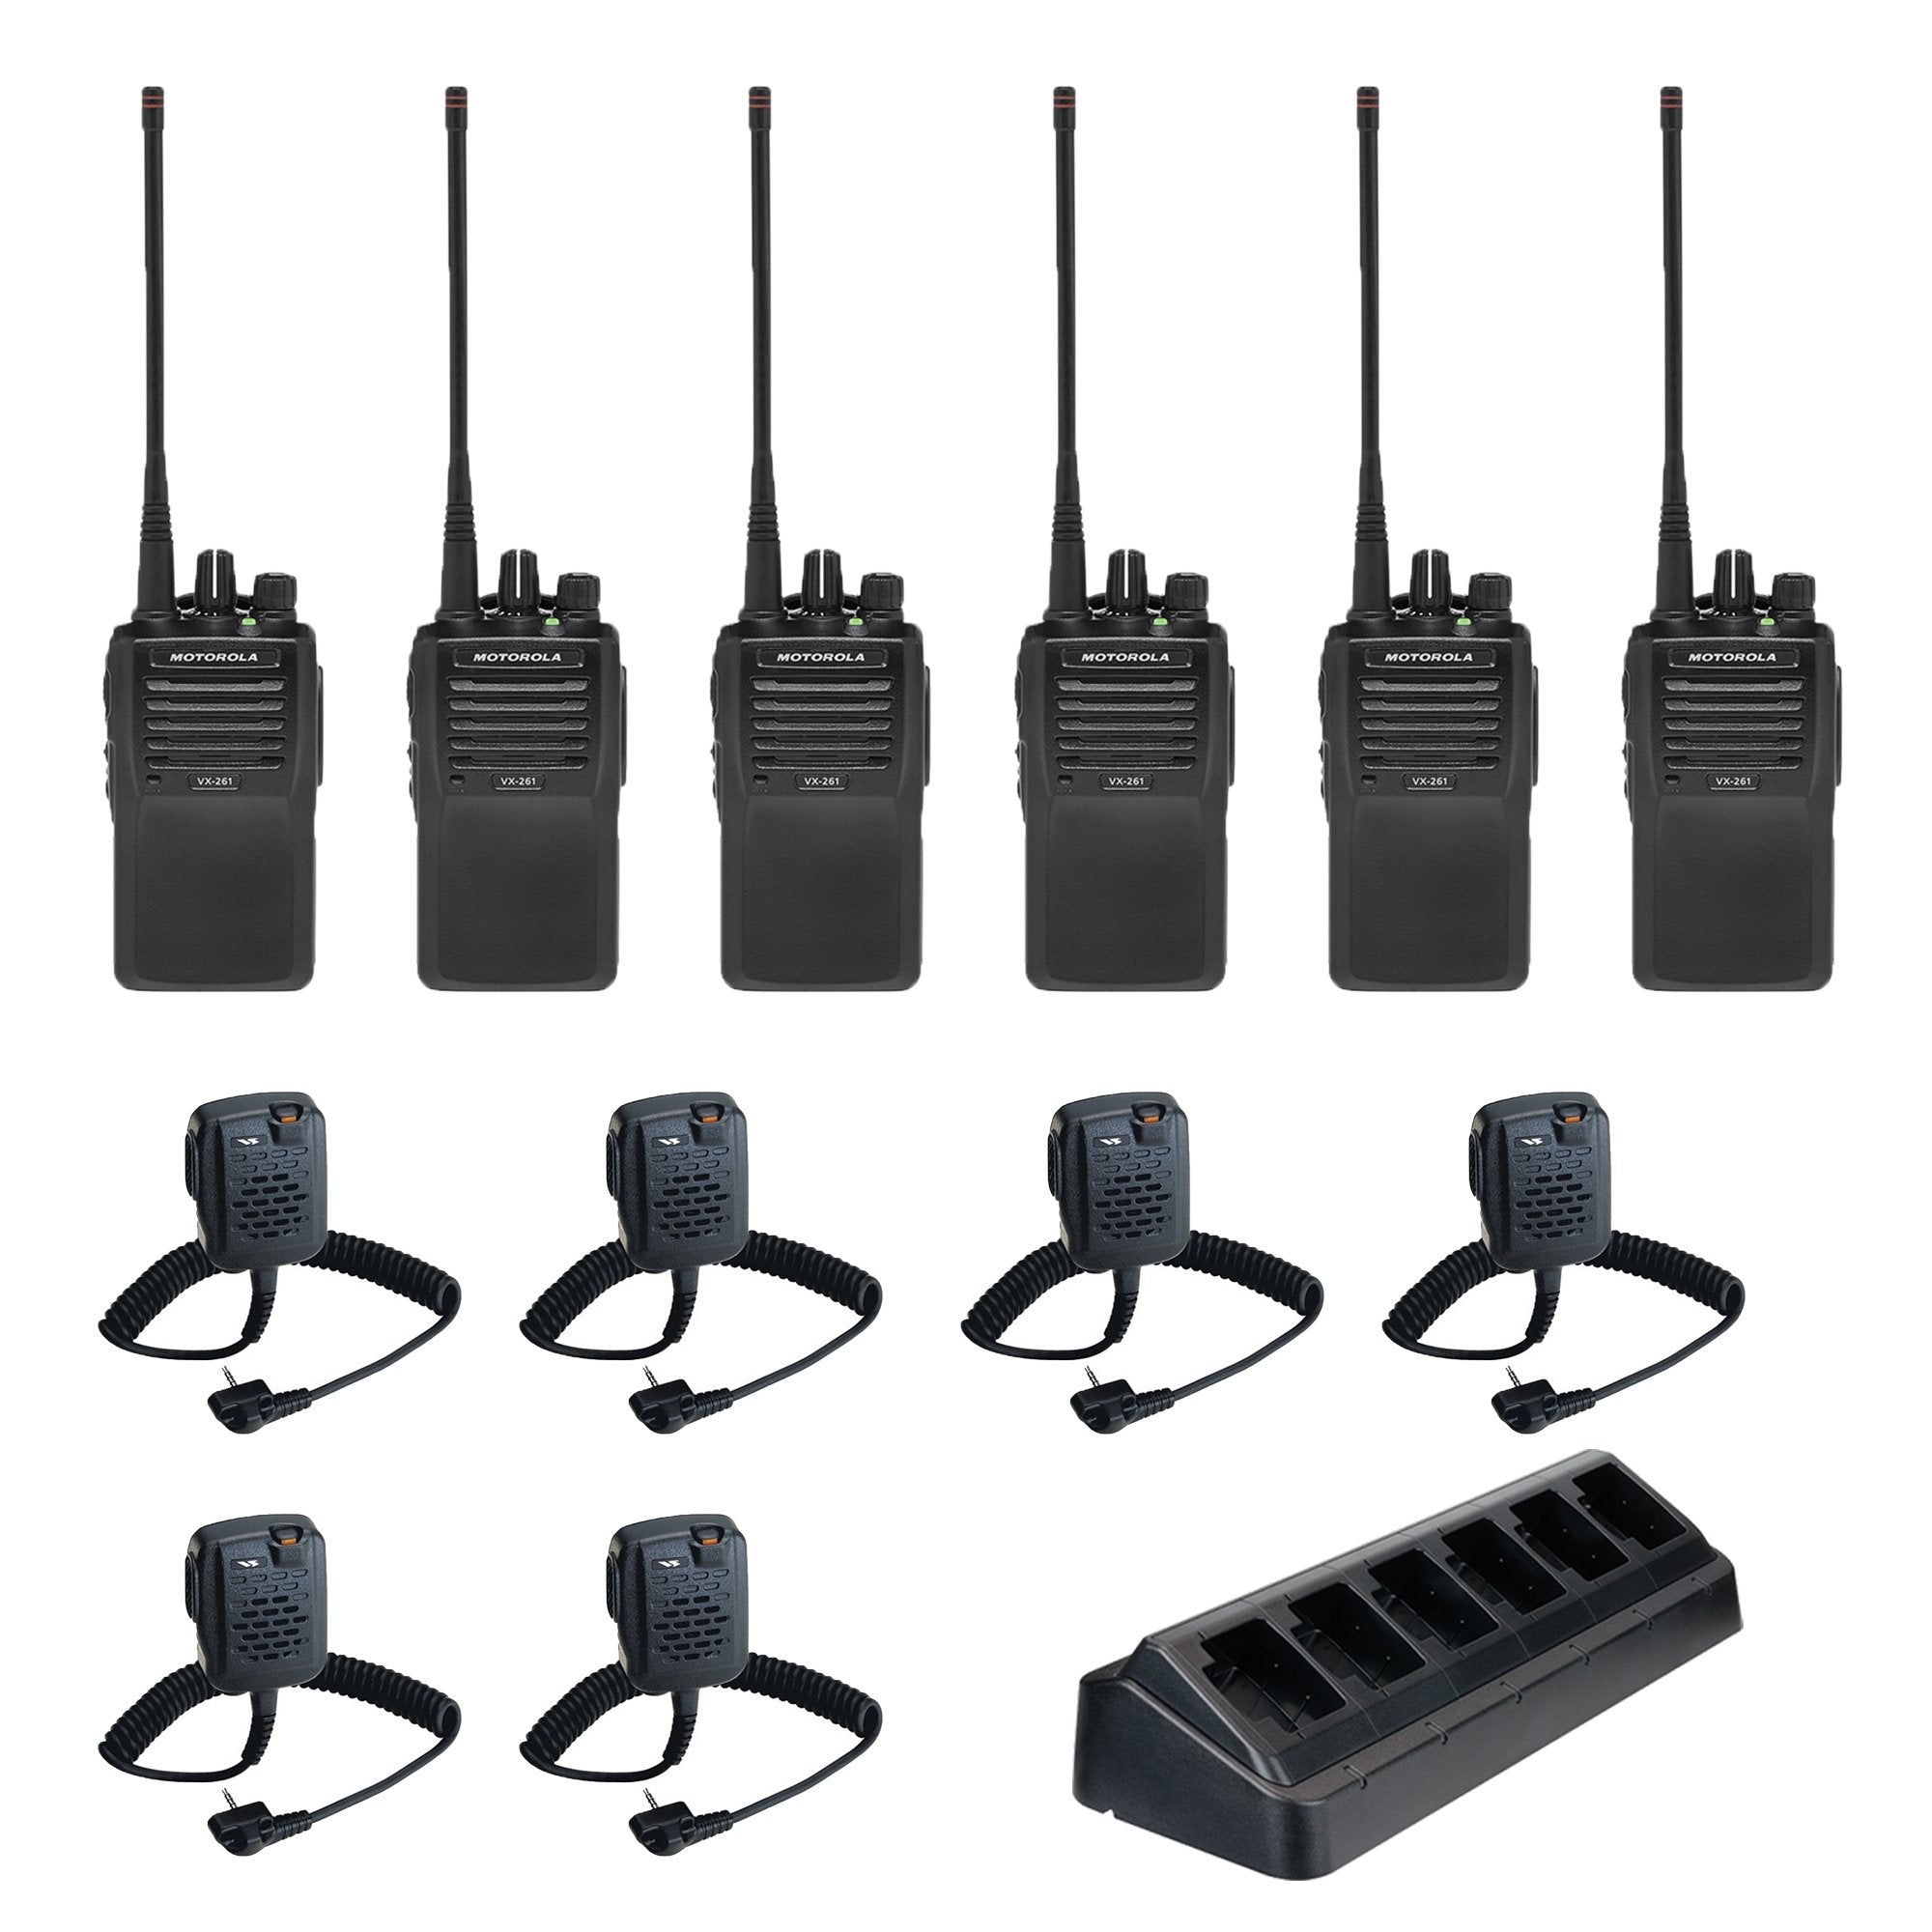 VX-261 5 Watt 16 Channel UHF or VHF Radio 6 pack with multi unit charger and speaker microphones